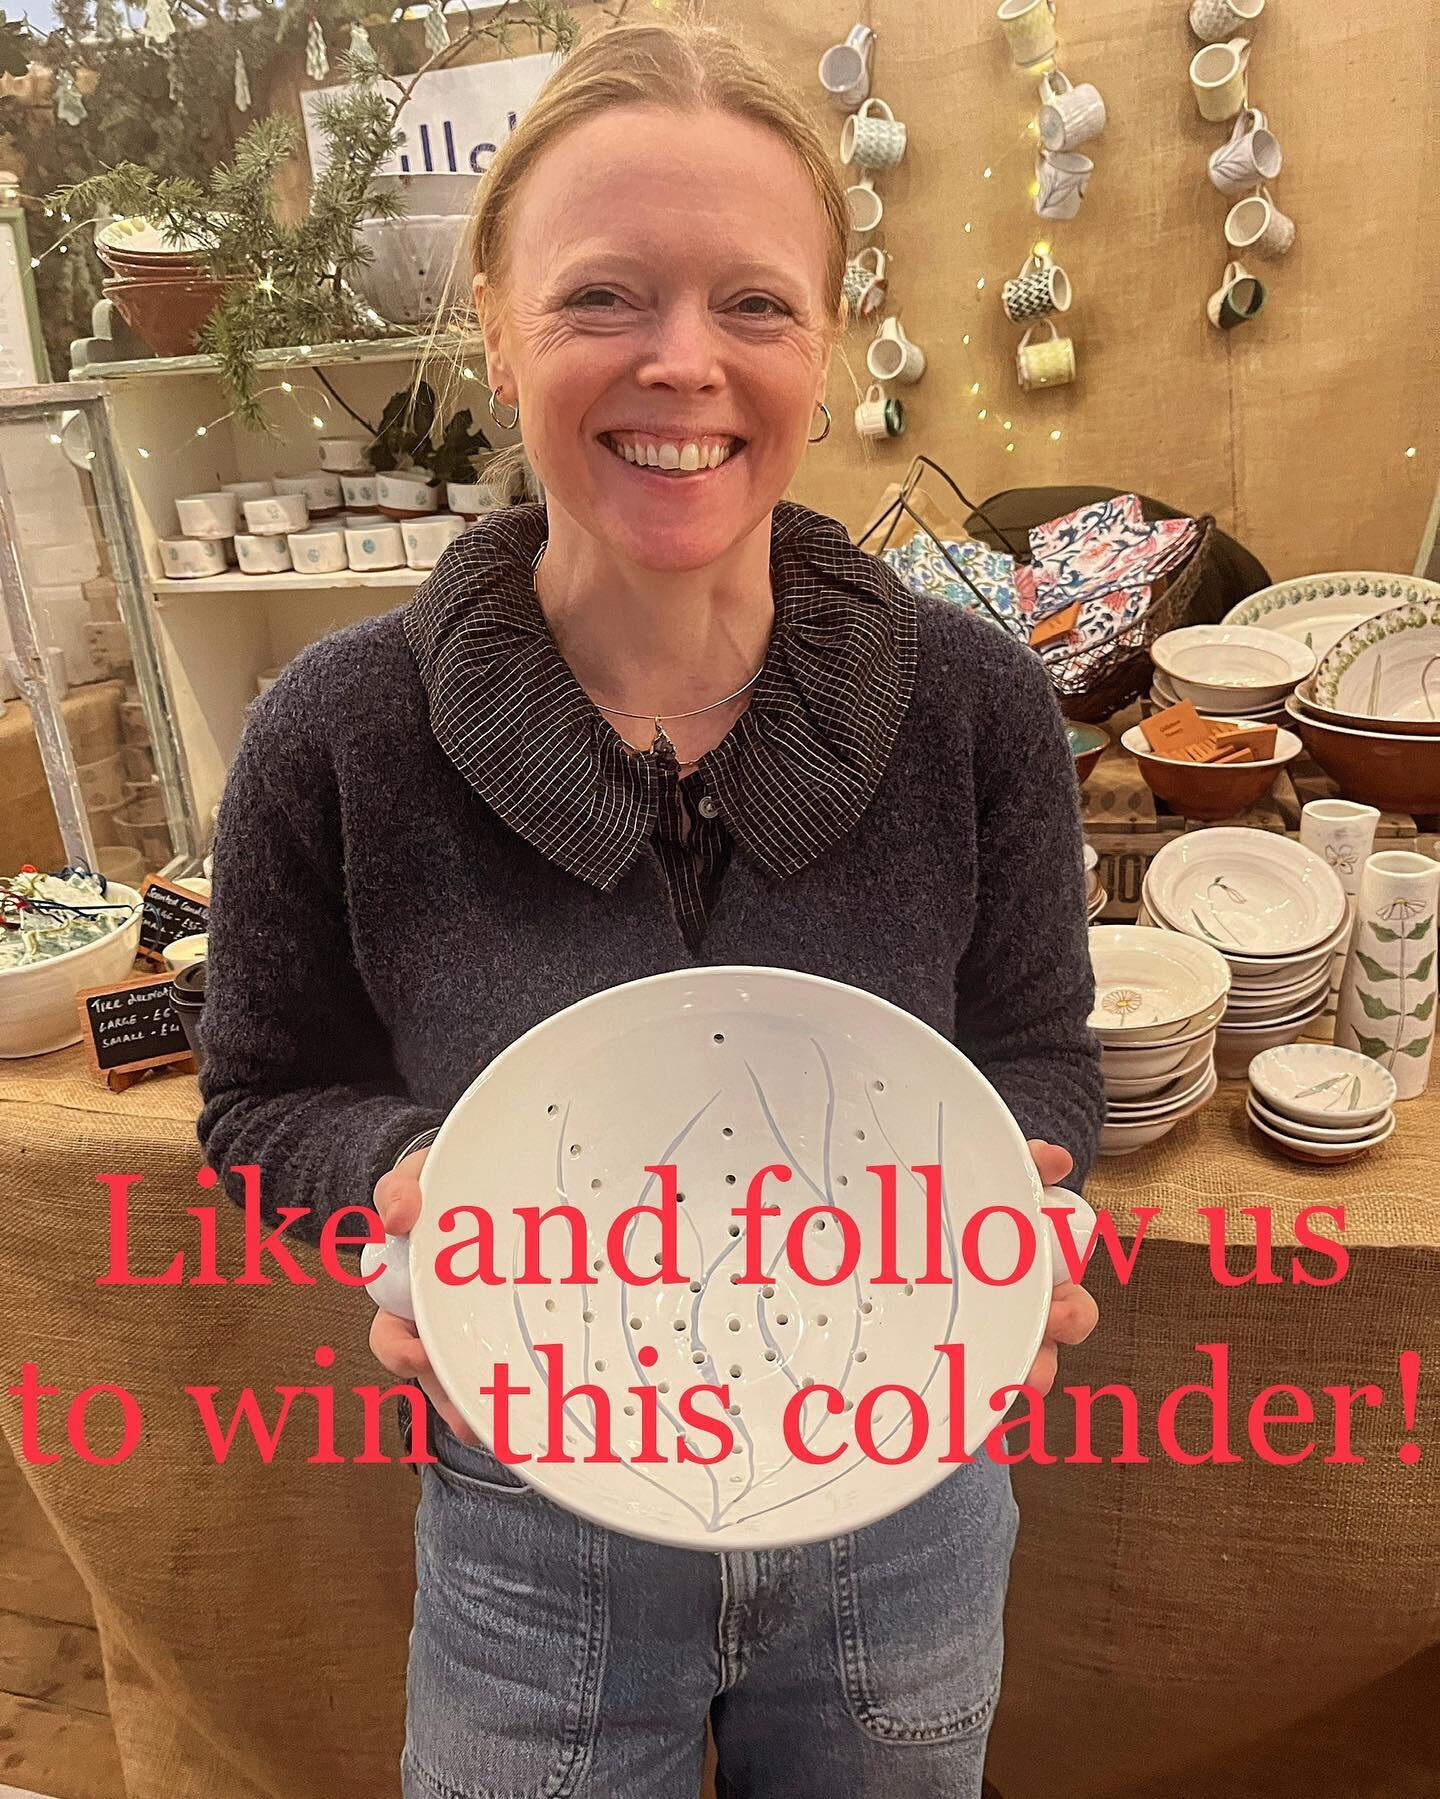 Come and see us at the #wealdentimesmidwinterfair today, Friday or Saturday - and have a chance to win this colander (modelled by the potter) - just like this post and follow us. Winner to be selected at random will be announced at the end of the sho